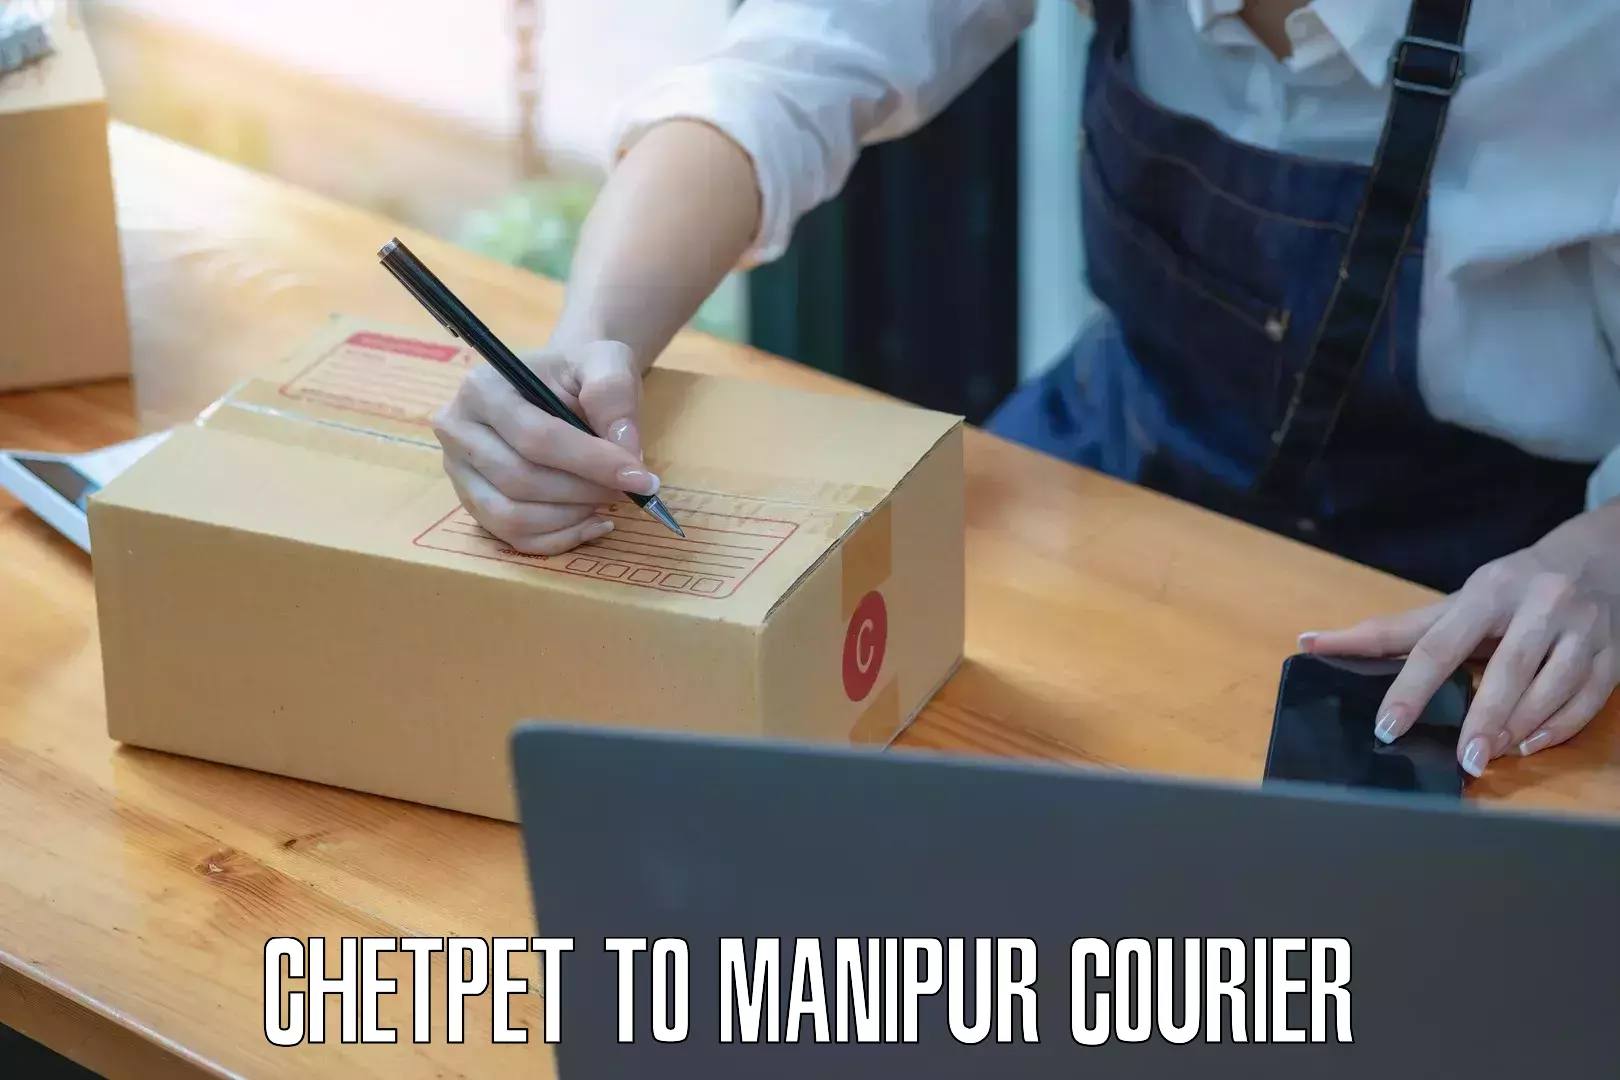 State-of-the-art courier technology Chetpet to Chandel